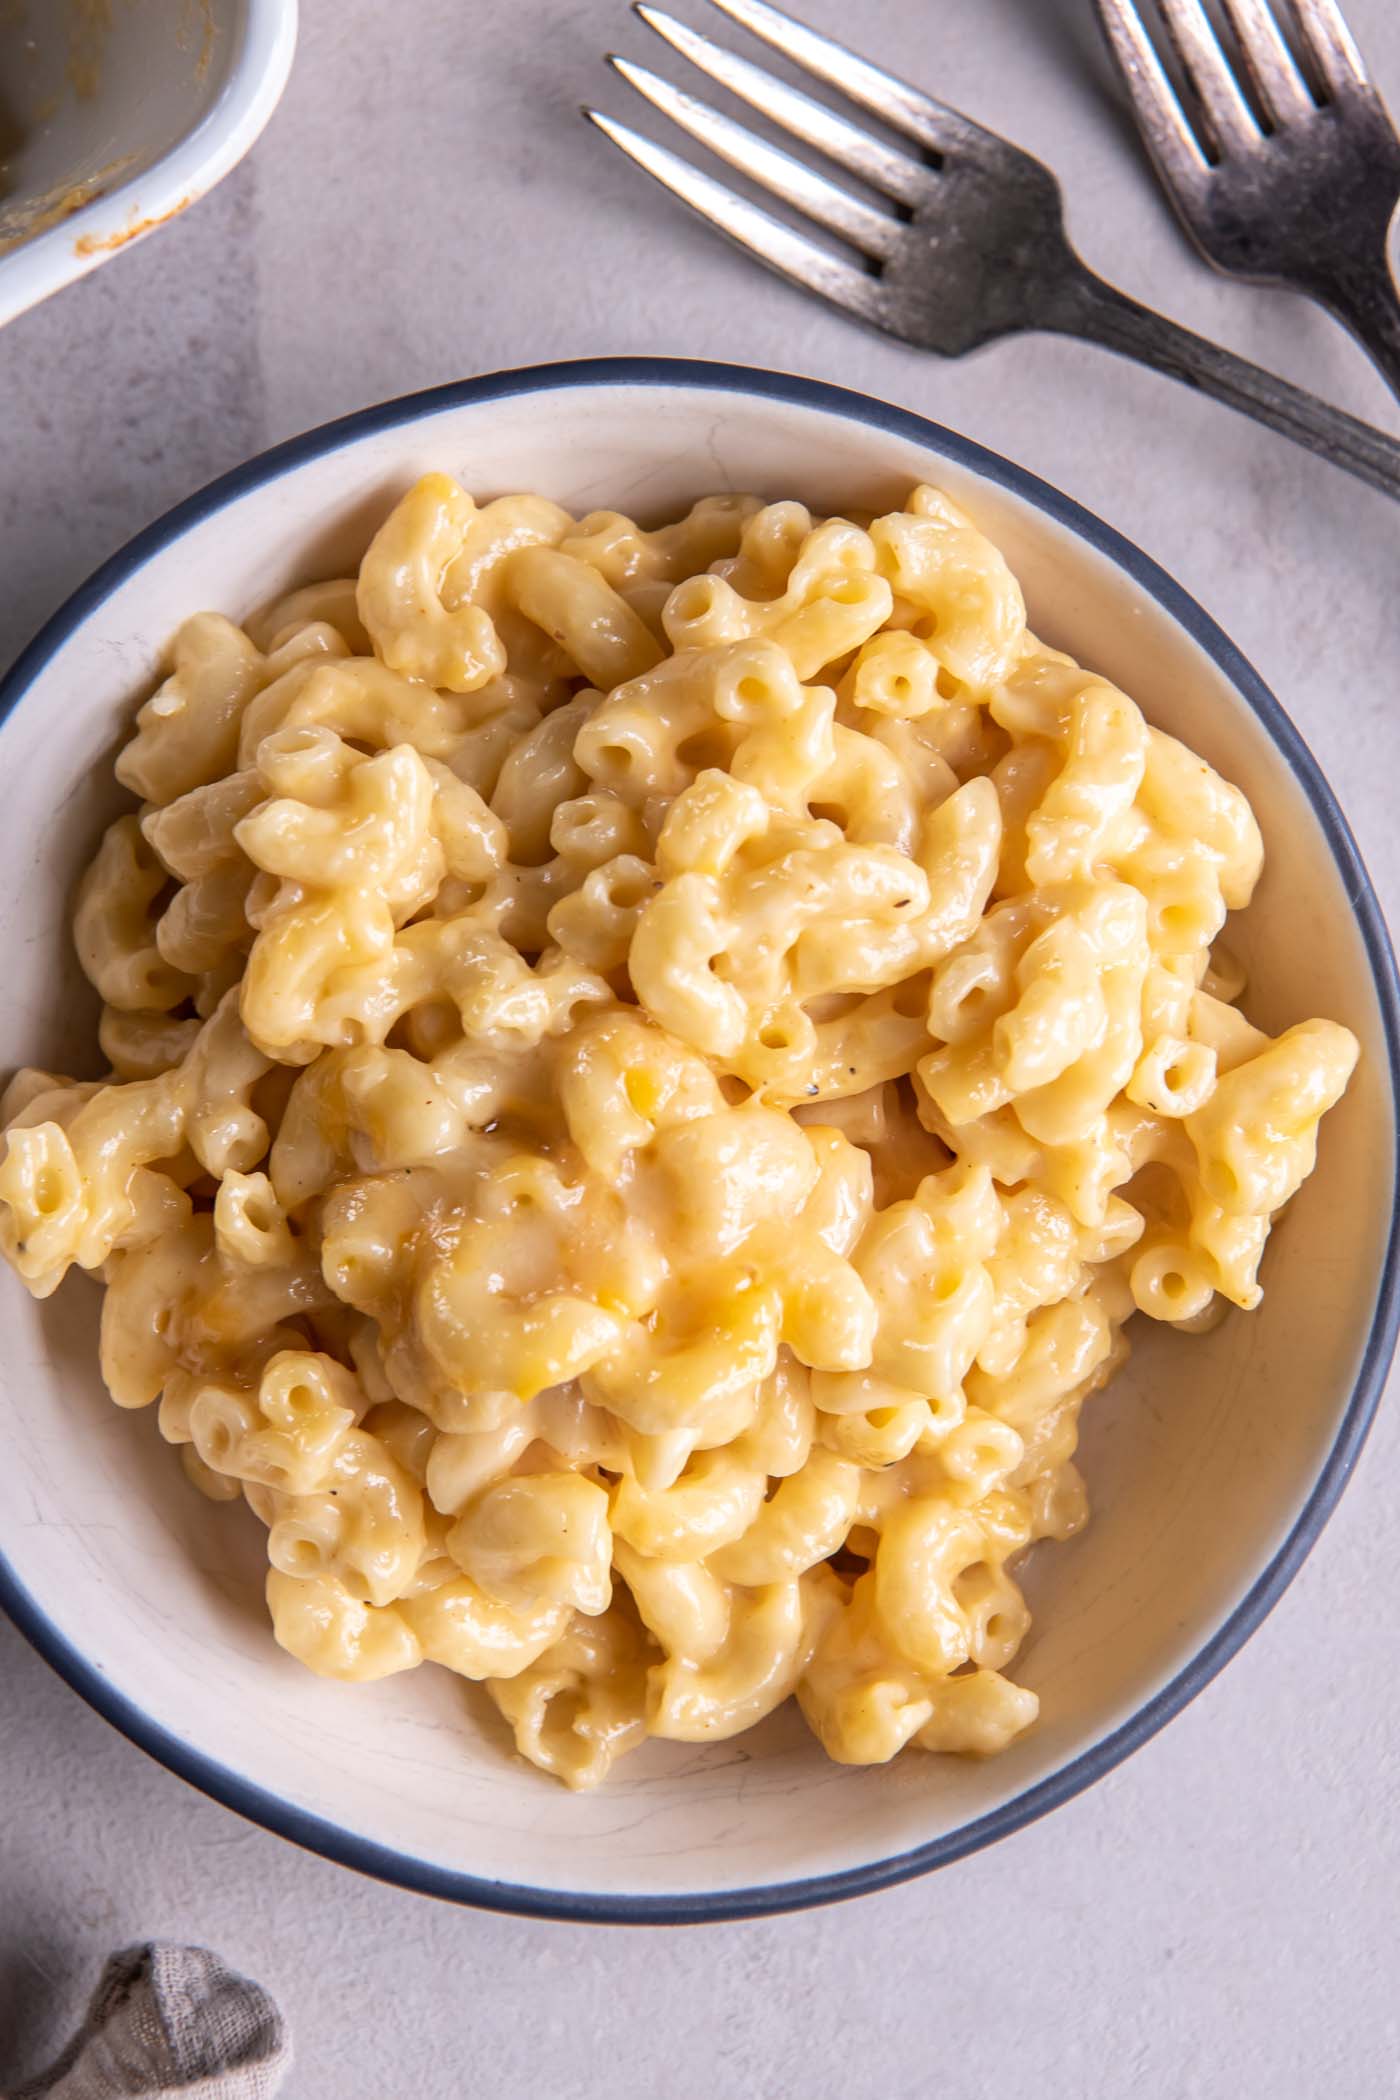 Homemade mac and cheese served in a bowl.